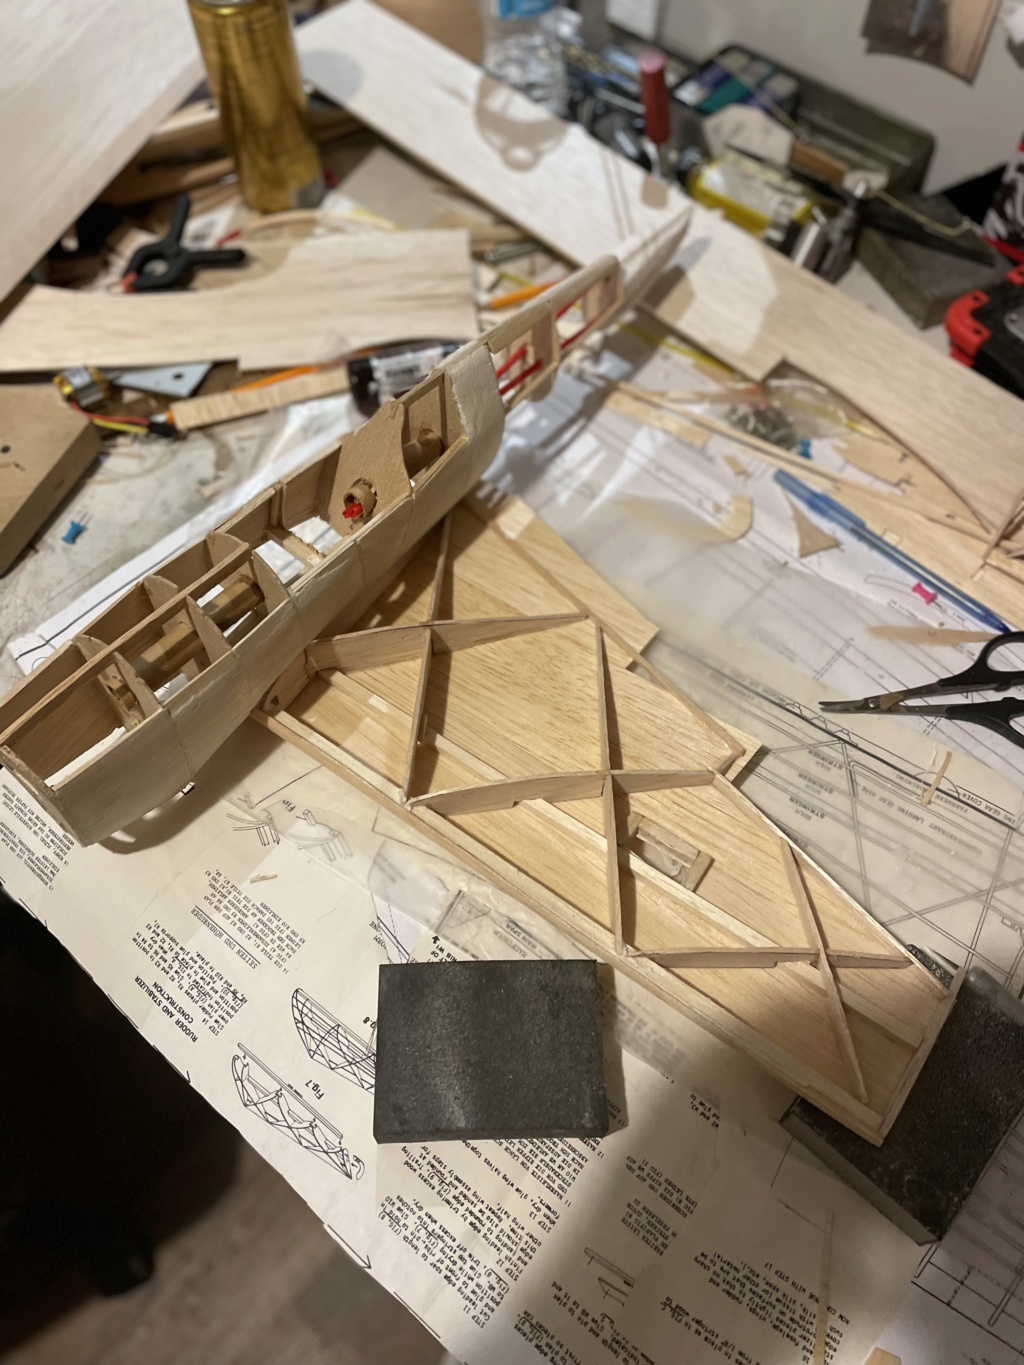 Building a 50 year old Comet P-40 Kit 03111